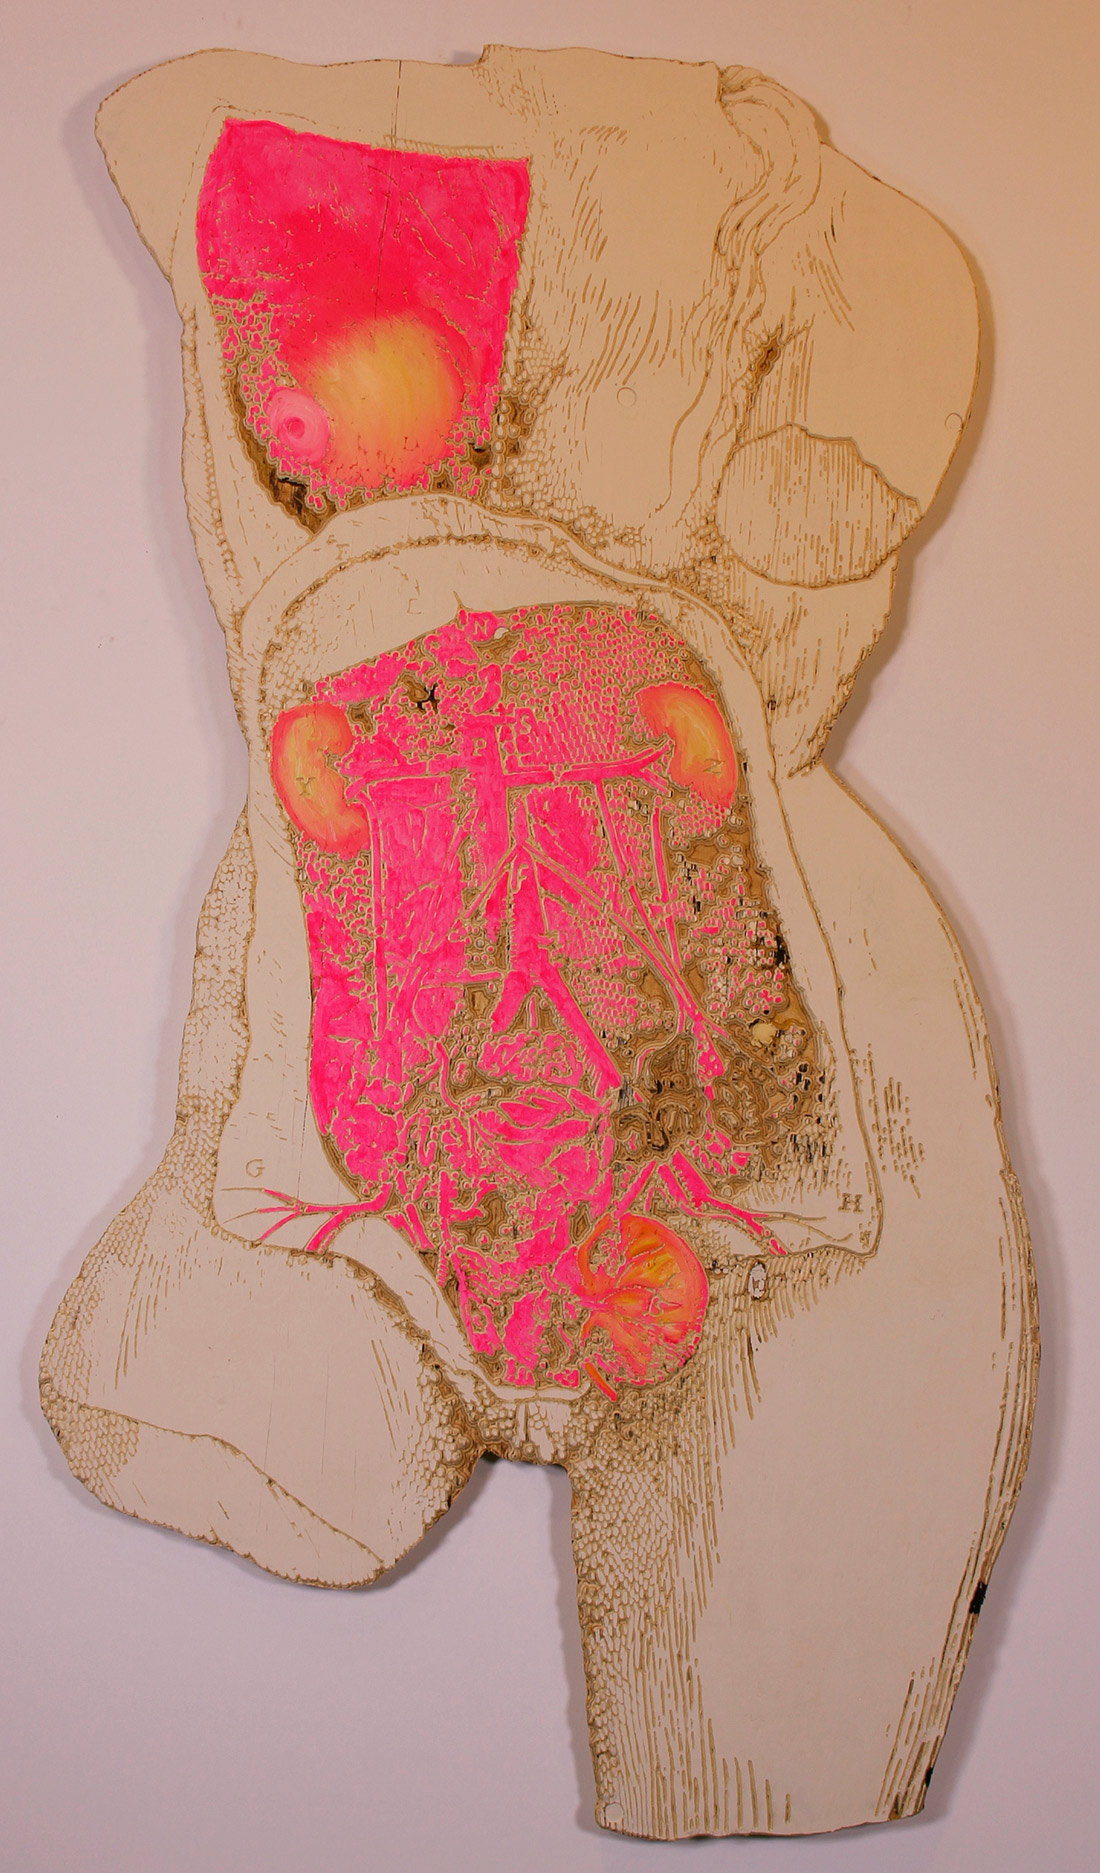 Image of a human body by Marnie Blair